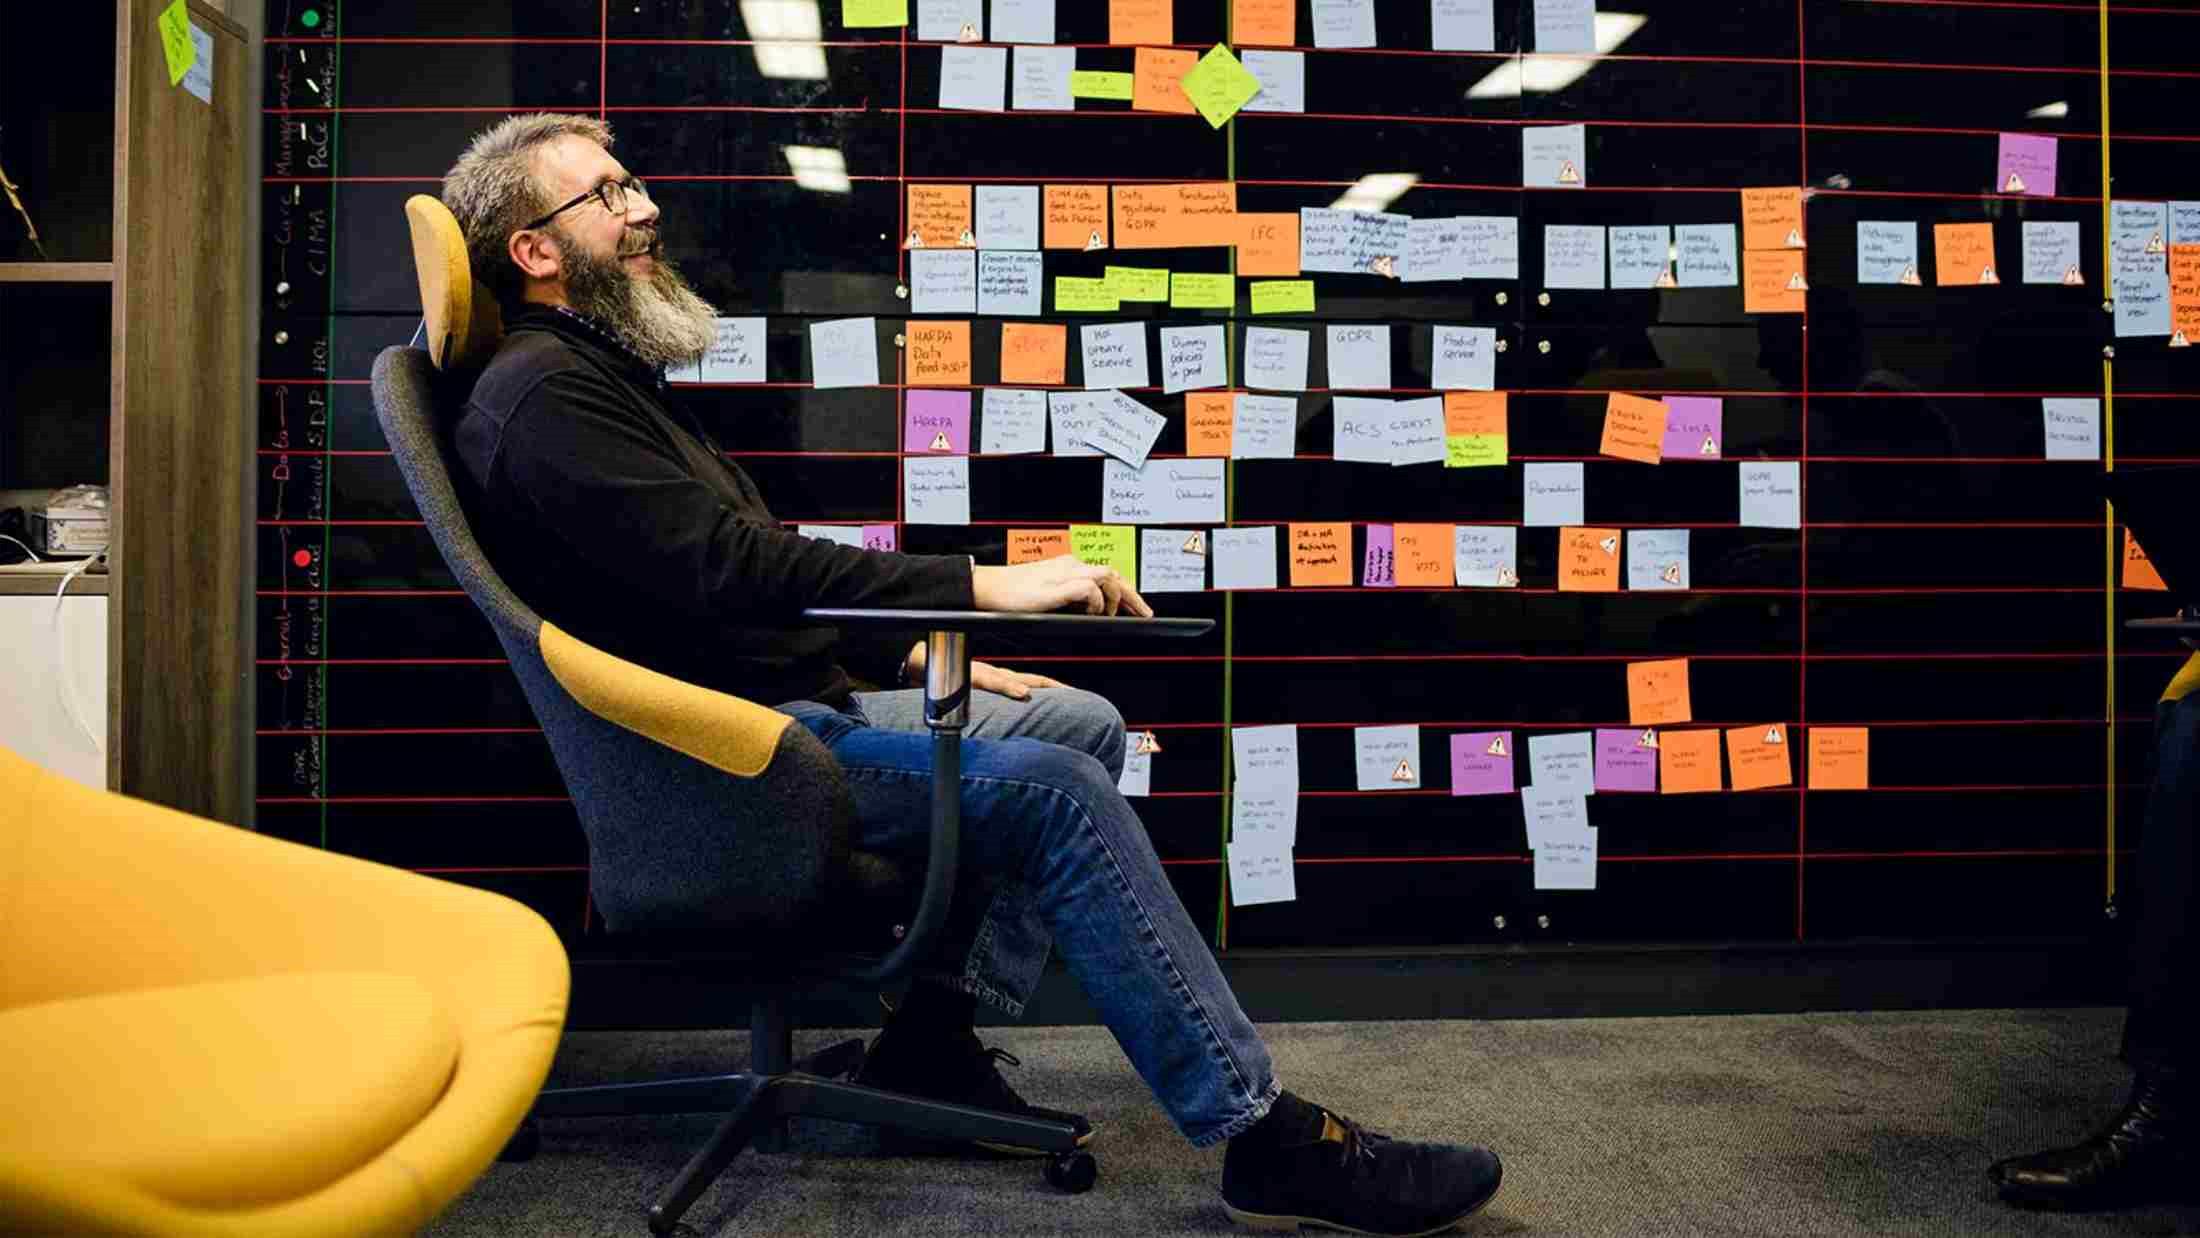 A team member sitting in front of a Kanban board